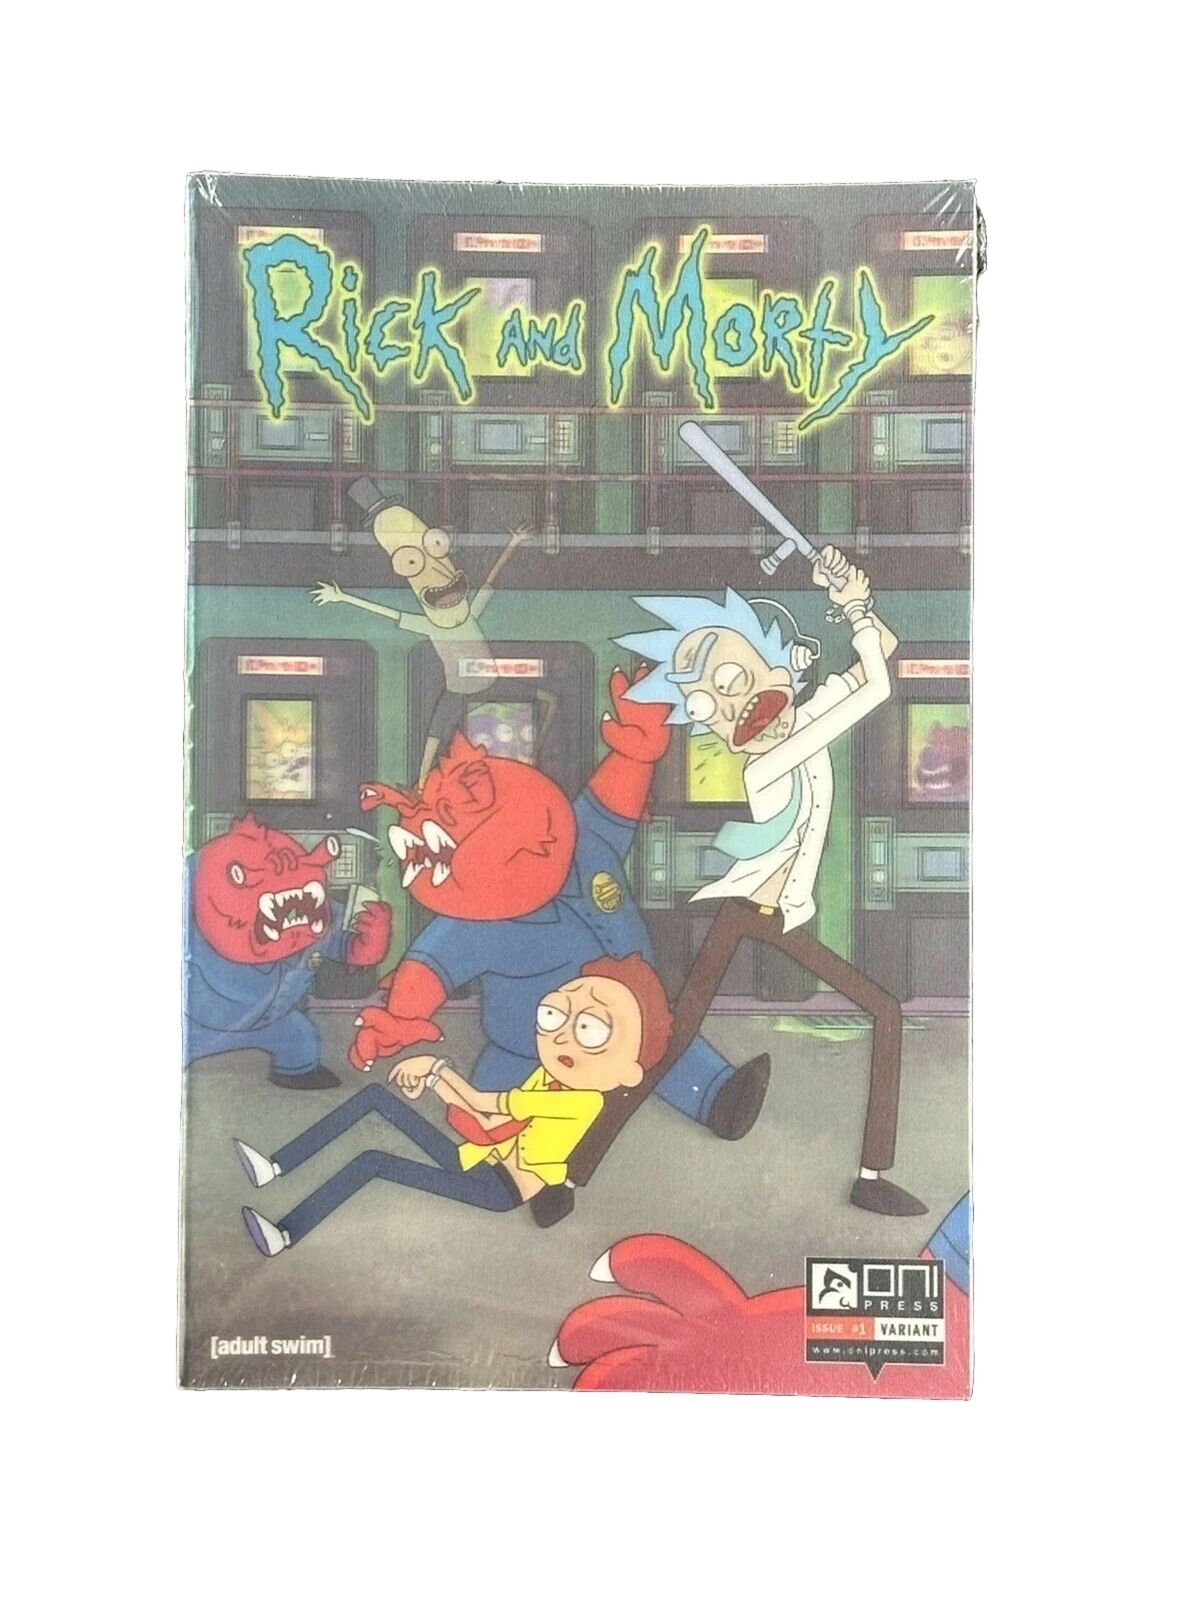 Rick and Morty #1 ARTIST PROOF Comic - Lenticular Cover Variant - RARE